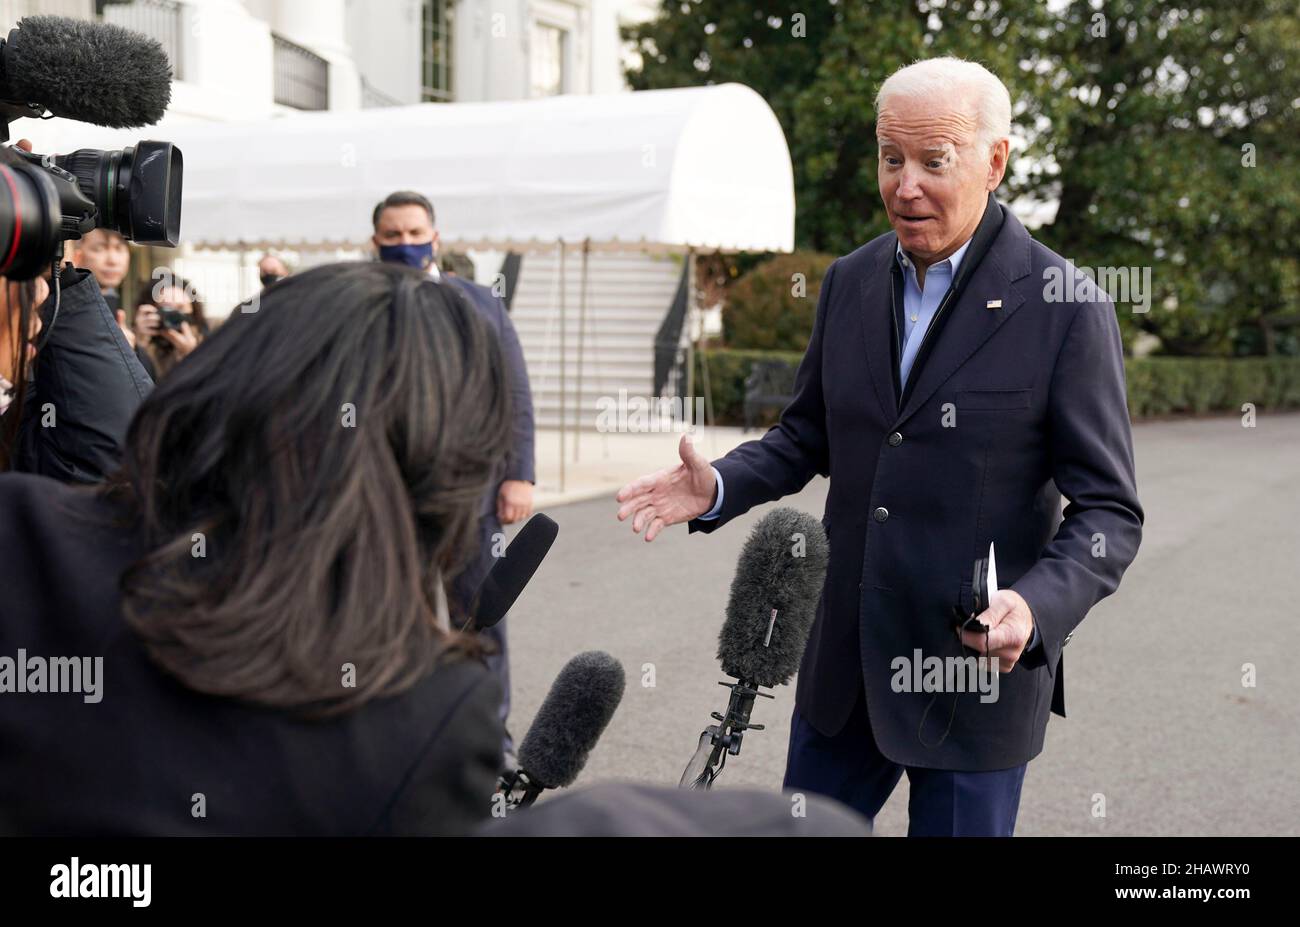 washington, DC, US, 15/12/2021, United States President Joe Biden speaks to media as he walks toward Marine One en route to Joint Base Andrews where he will depart to Fort Campbell, Kentucky and then on to Mayfield and Dawson Springs, Kentucky to survey storm damage following extreme weather events at the White House in Washington, DC on Wednesday, December 15, 2021. A series of storms hit states across the Midwest and the South leaving entire communities in Kentucky destroyed. Credit: Leigh Vogel/Pool via CNP /MediaPunch Stock Photo